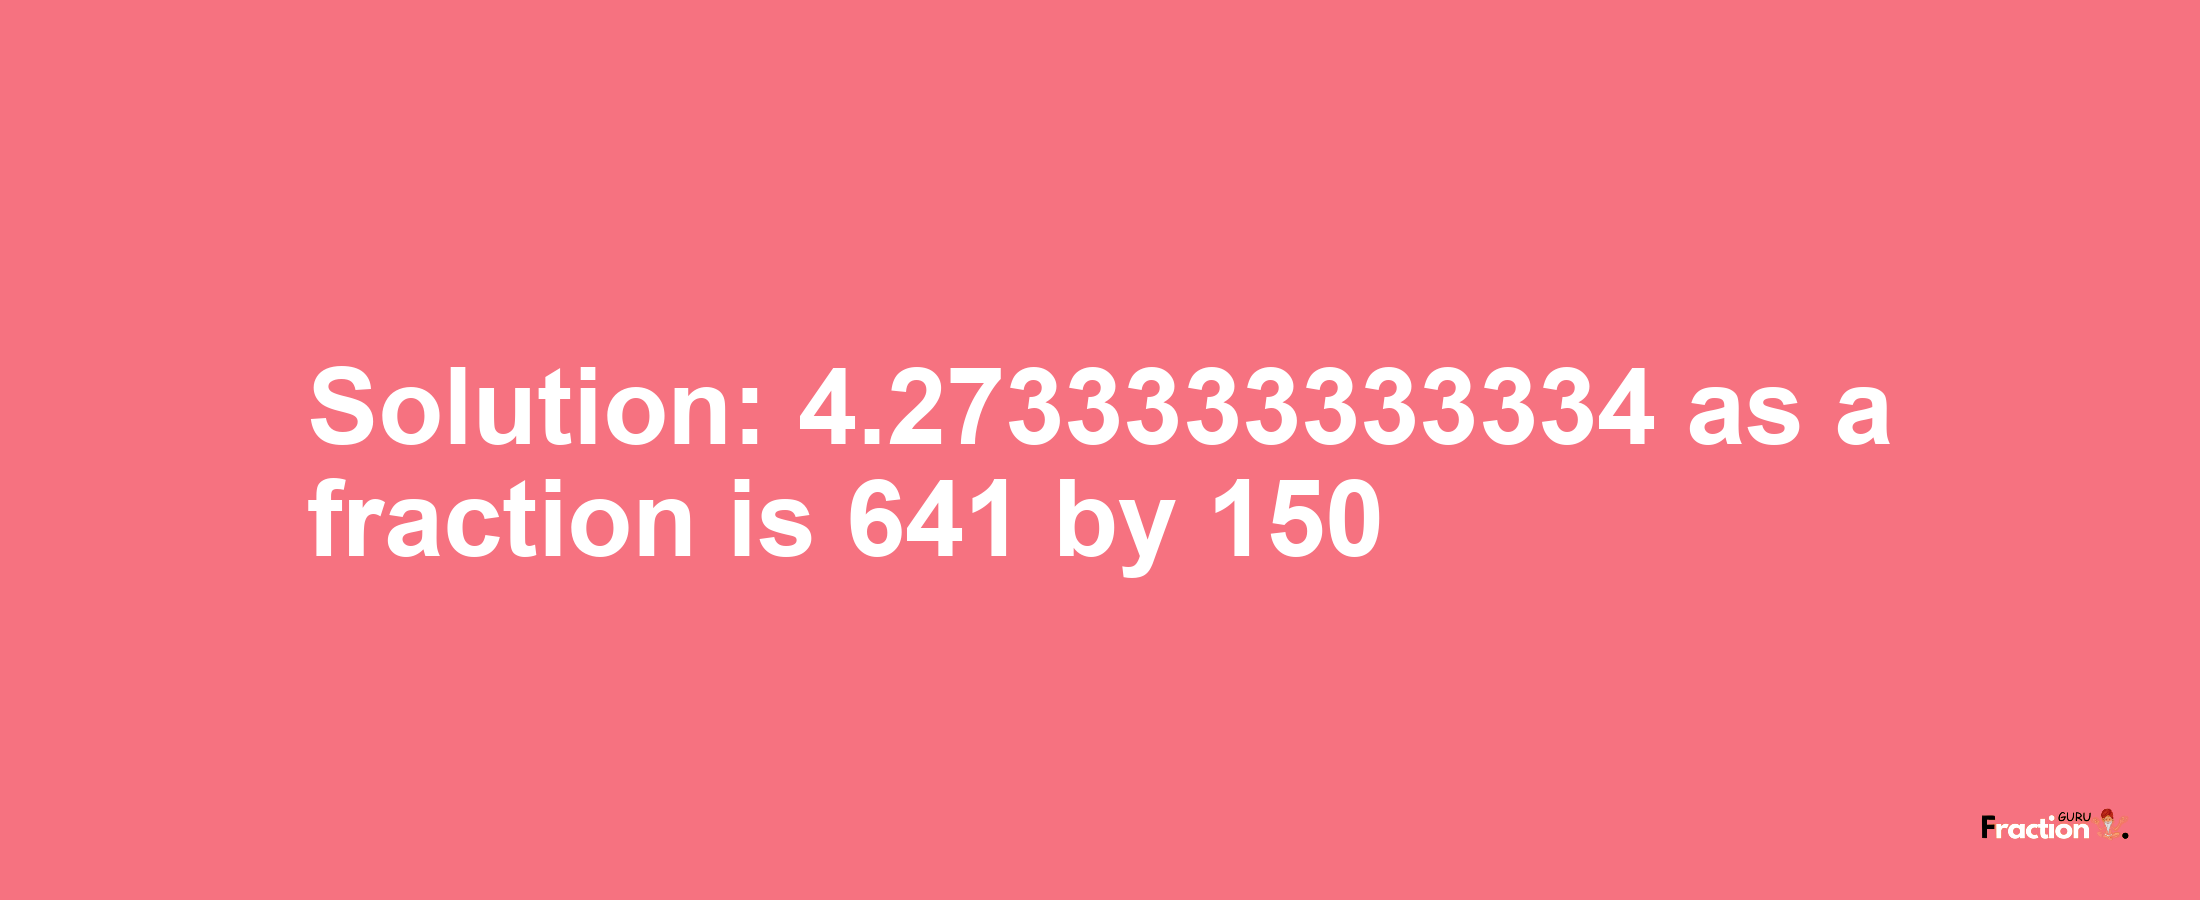 Solution:4.2733333333334 as a fraction is 641/150